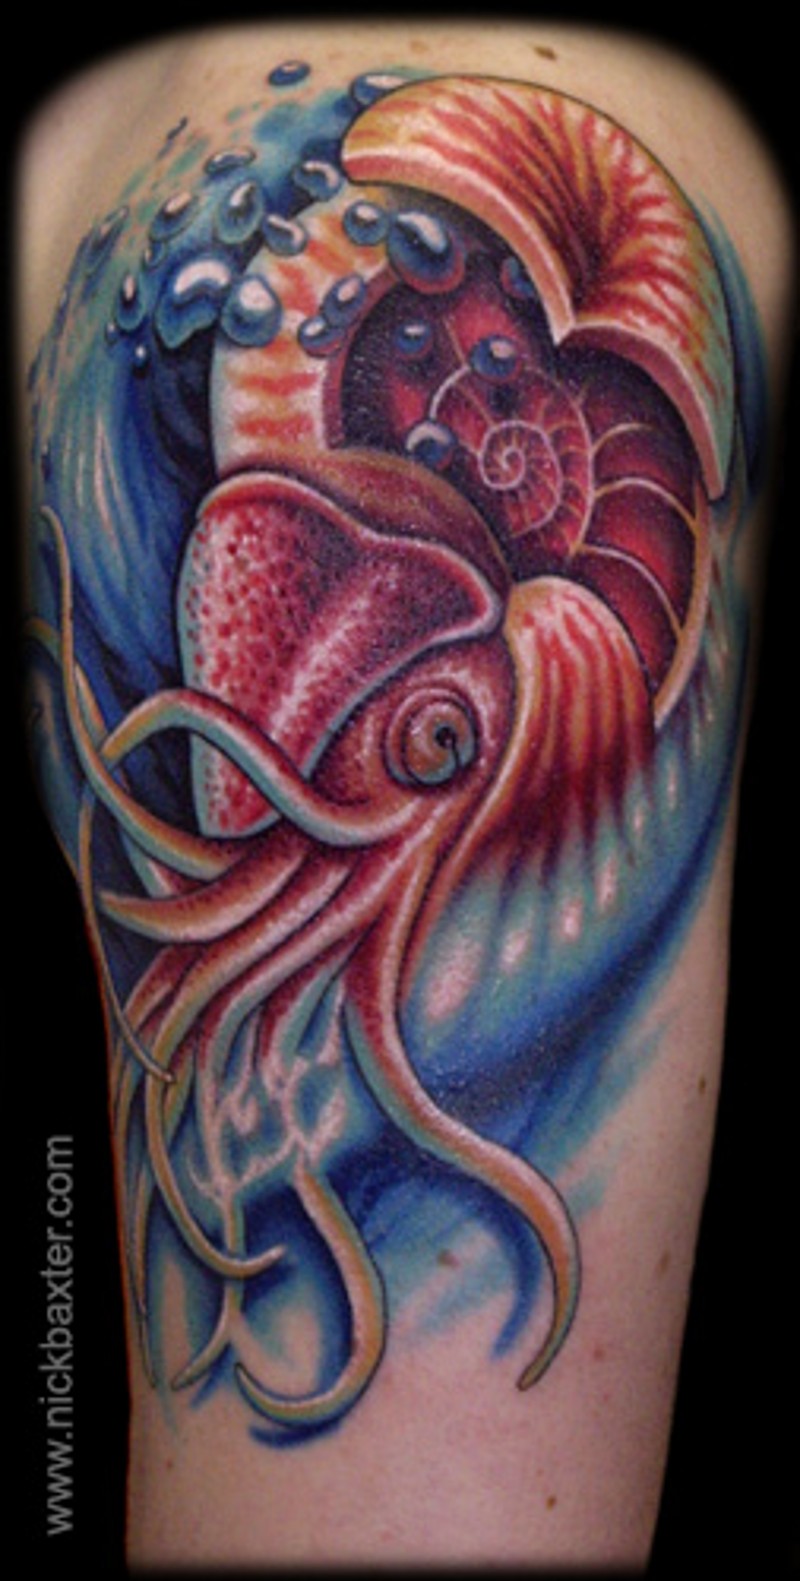 Nice detailed multicolored leg tattoo of cool squid in waters